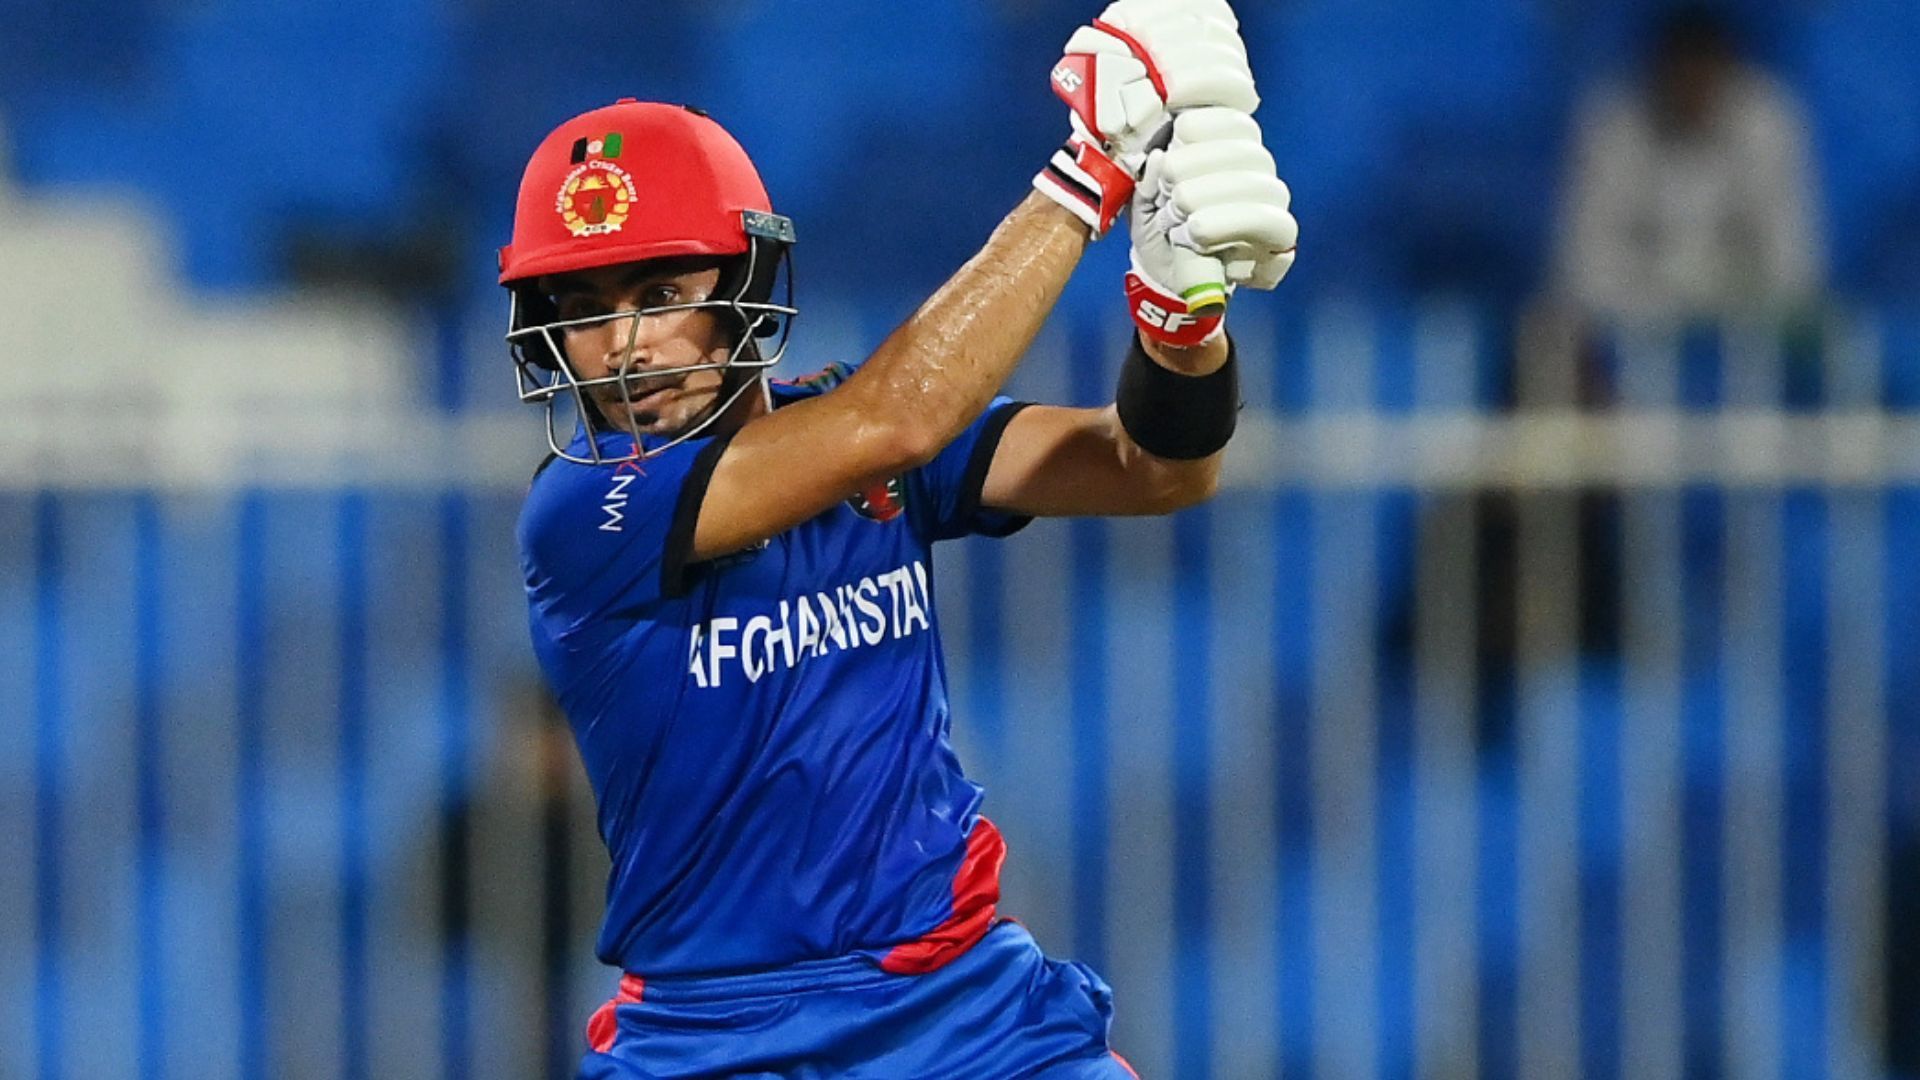 Rahmanullah Gurbaz has been in scintillating form leading up to the Asia Cup.